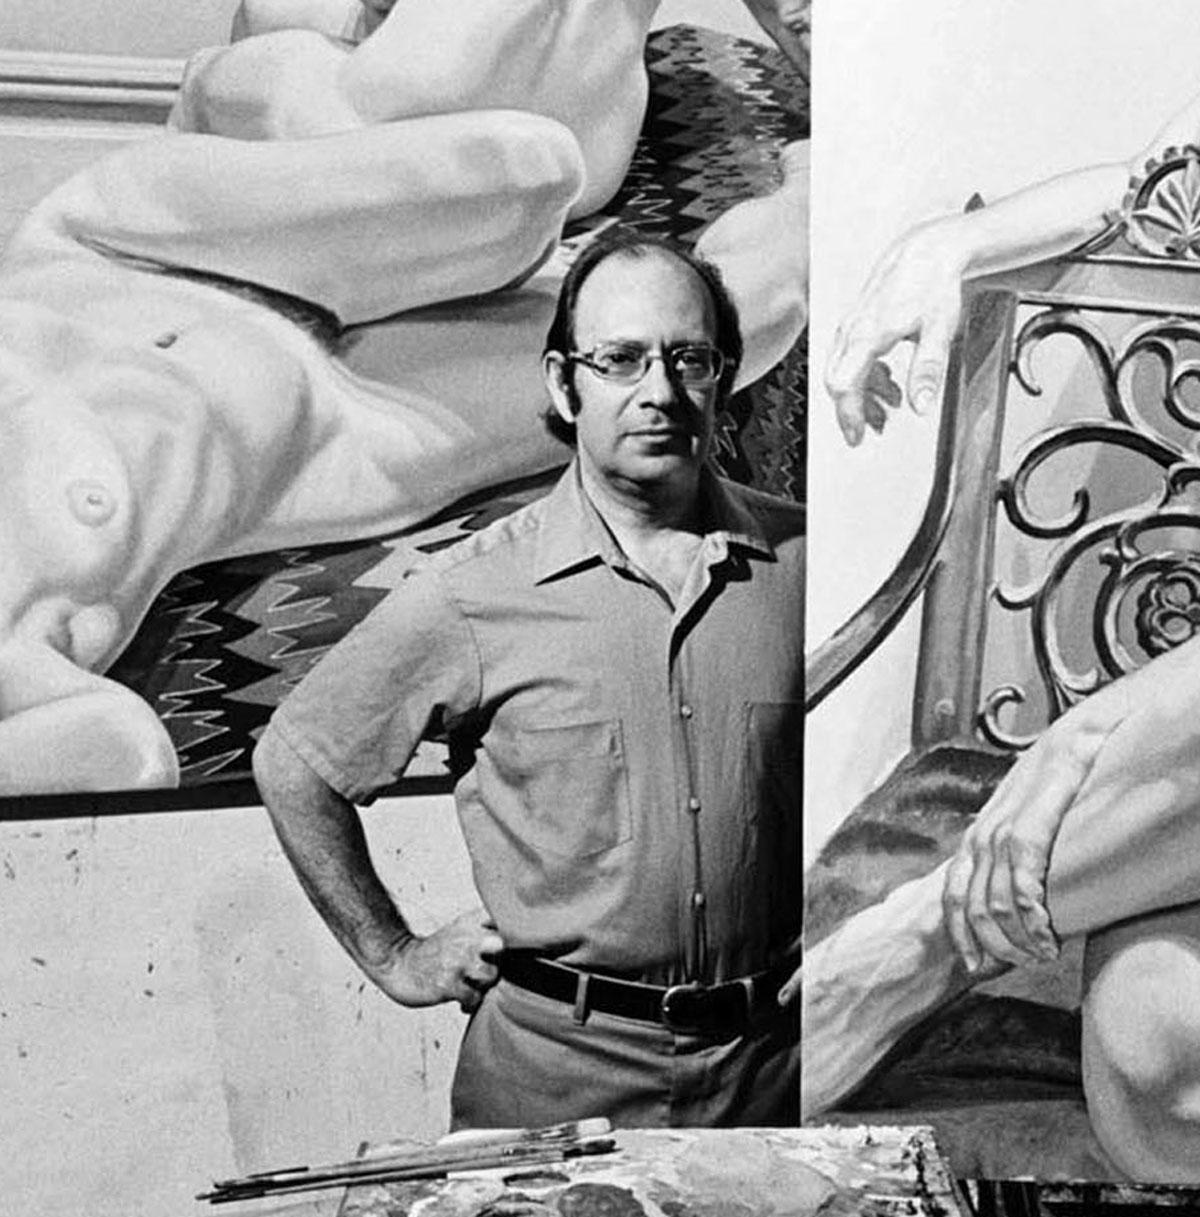  Artist Philip Pearlstein in his studio with his paintings - Photograph by Jack Mitchell